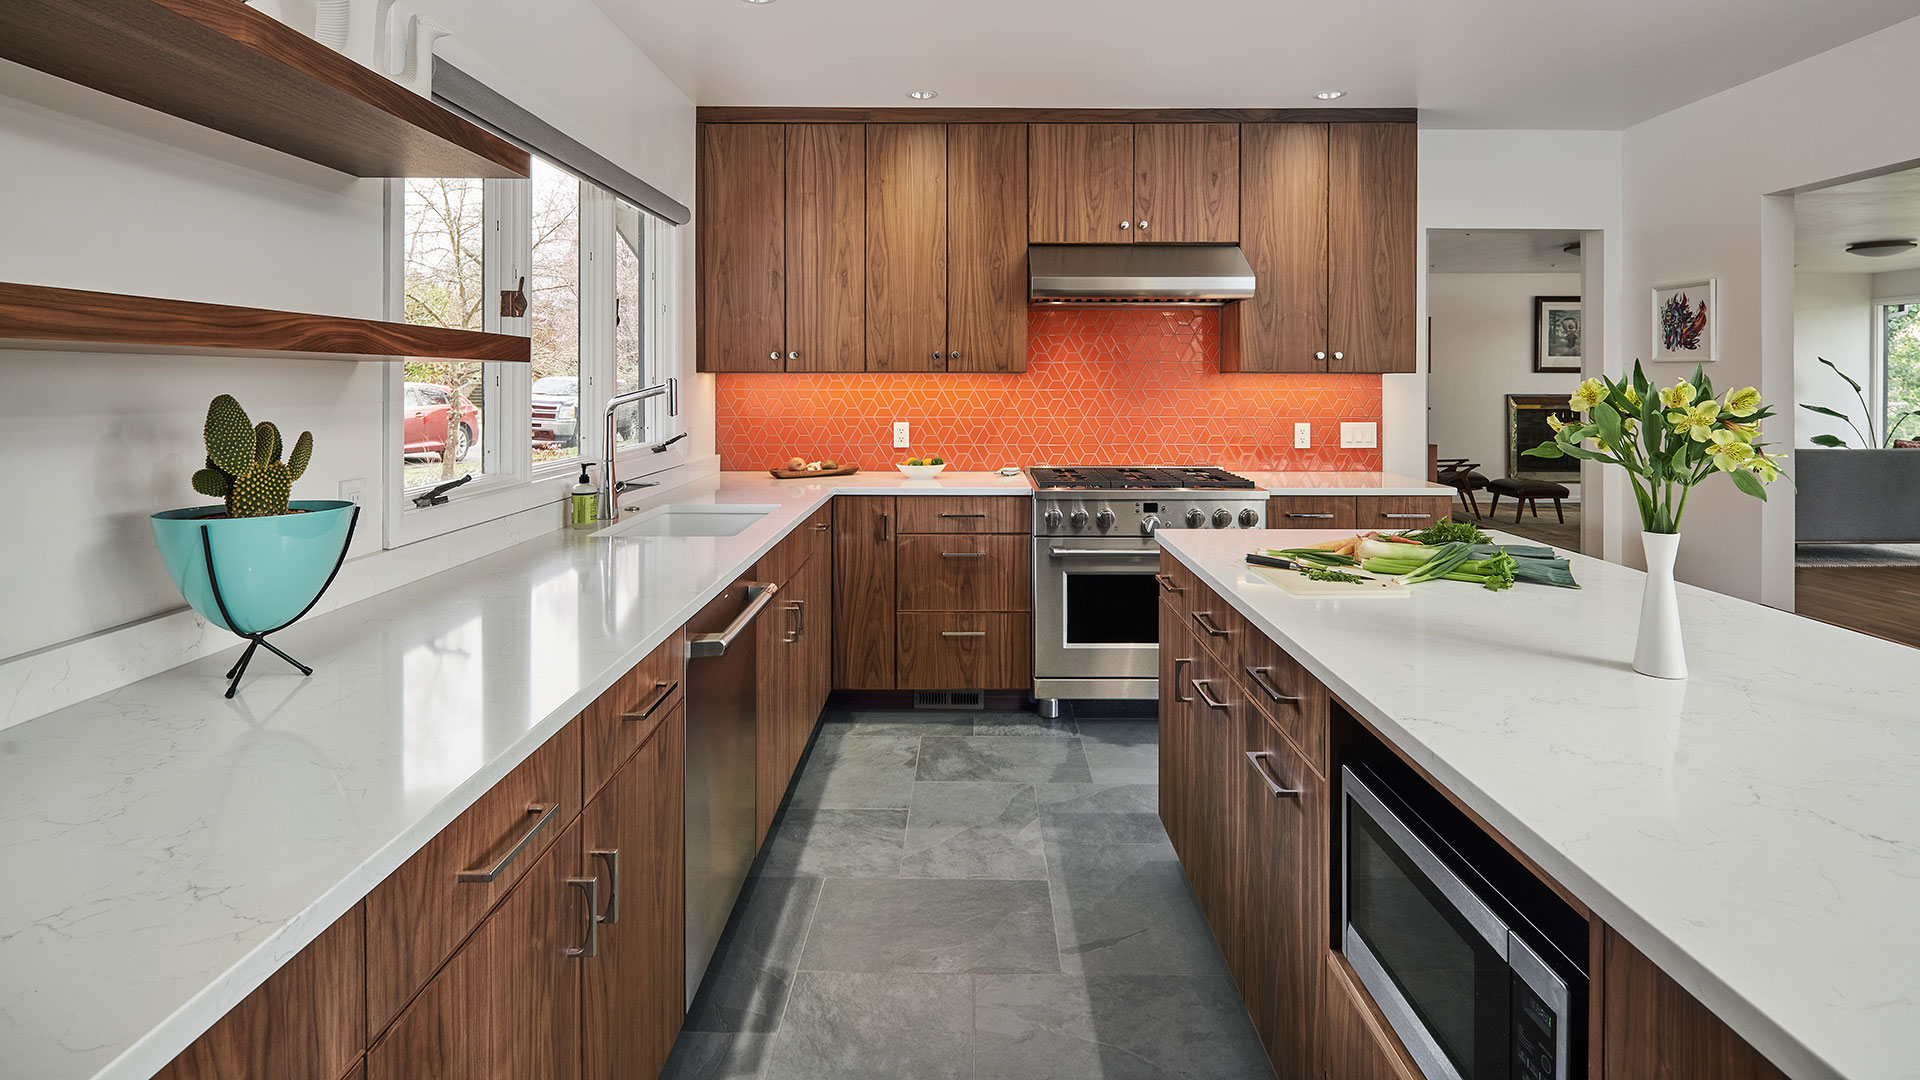 The renovated kitchen at the Eastmoreland Remodel features a large island and bright tomato orange backsplash tile.